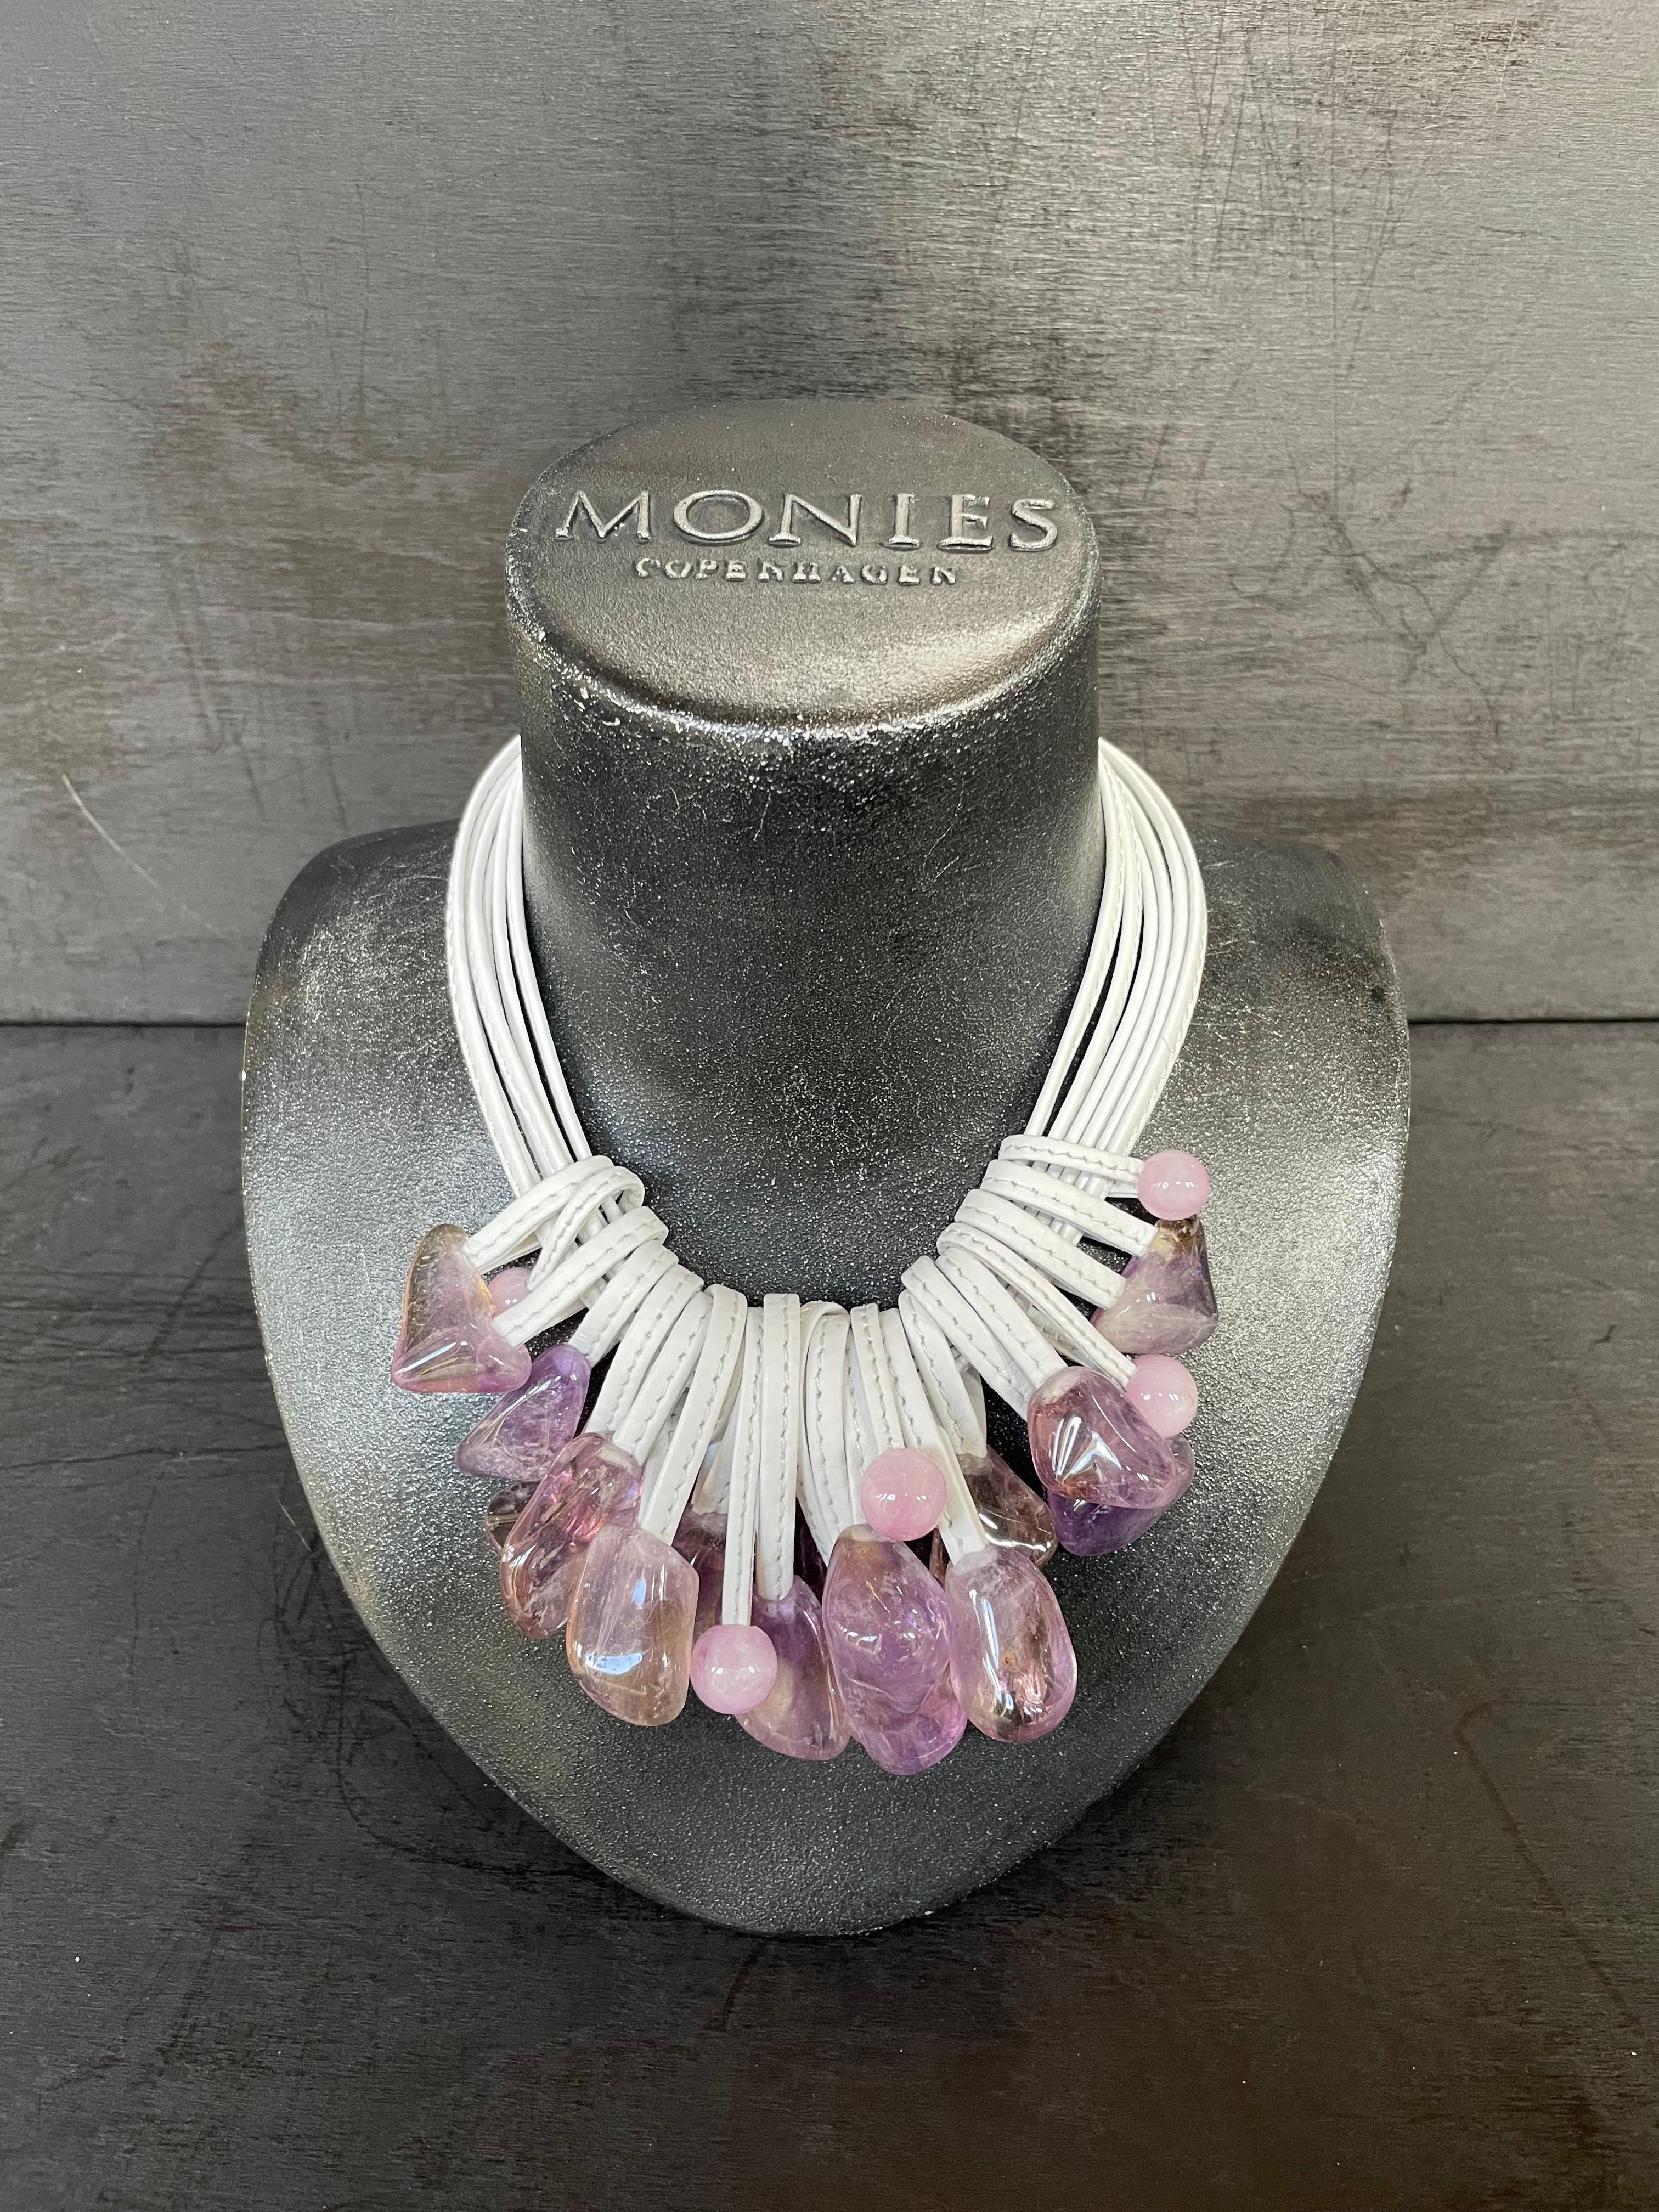 One-of-a-kind statement necklace from the Danish jewellery brand, Monies.
Made in Amethyst, Lavender Rose Quartz and Leather with a leather clasp.

Handcrafted in the Monies Atelier in Copenhagen.